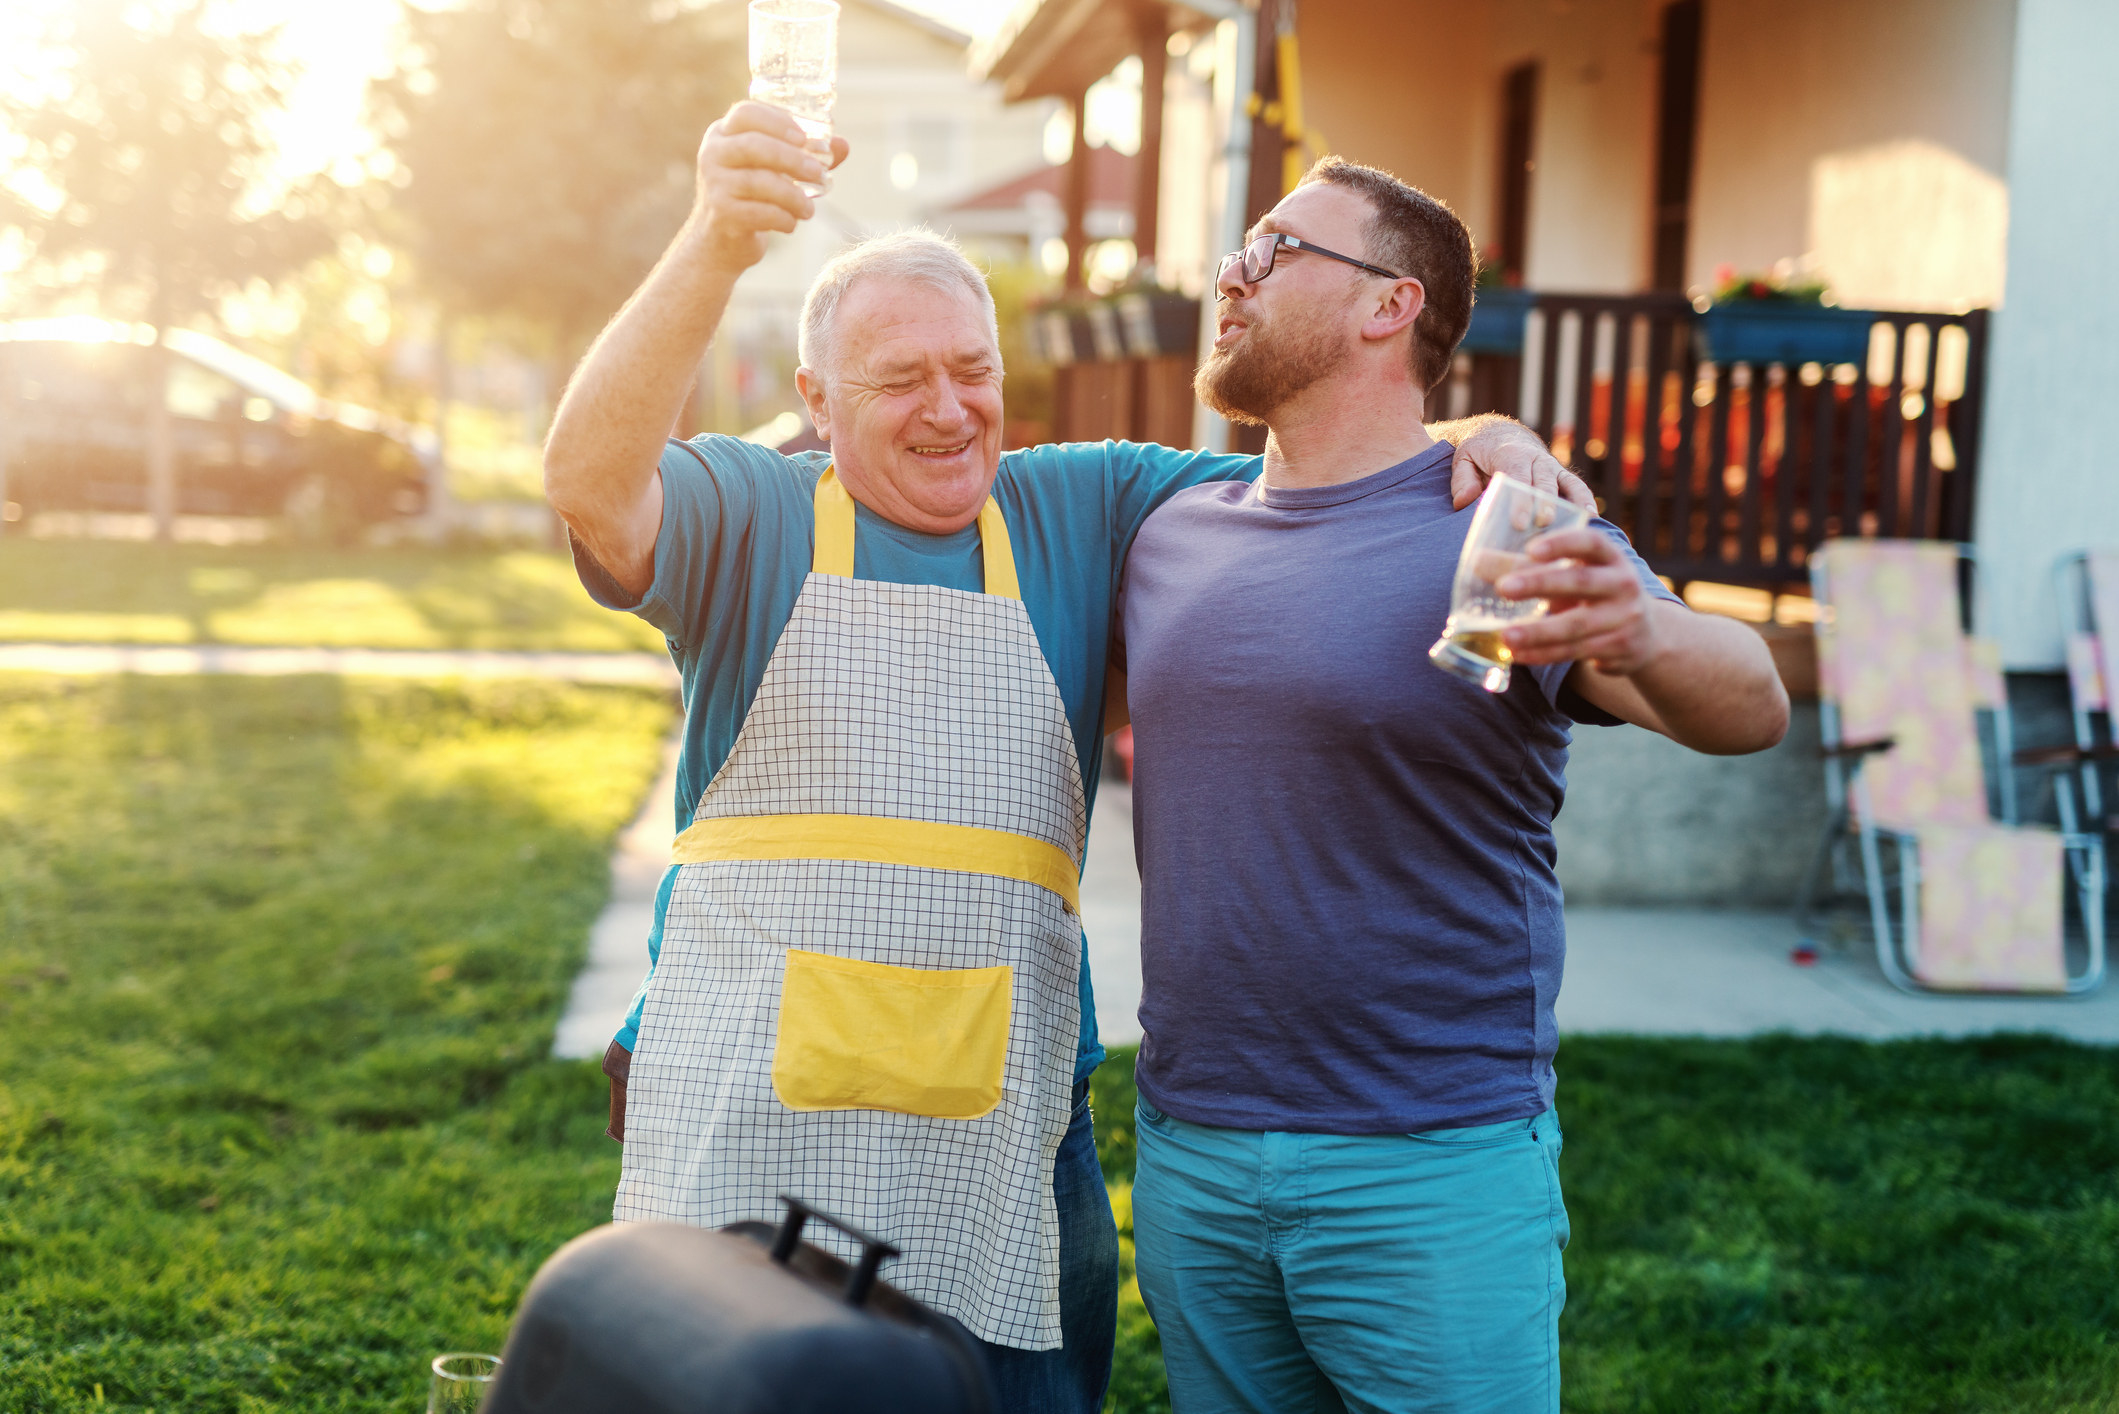 An older man with an apron hugs a younger man, with each of them holding a glass of beer